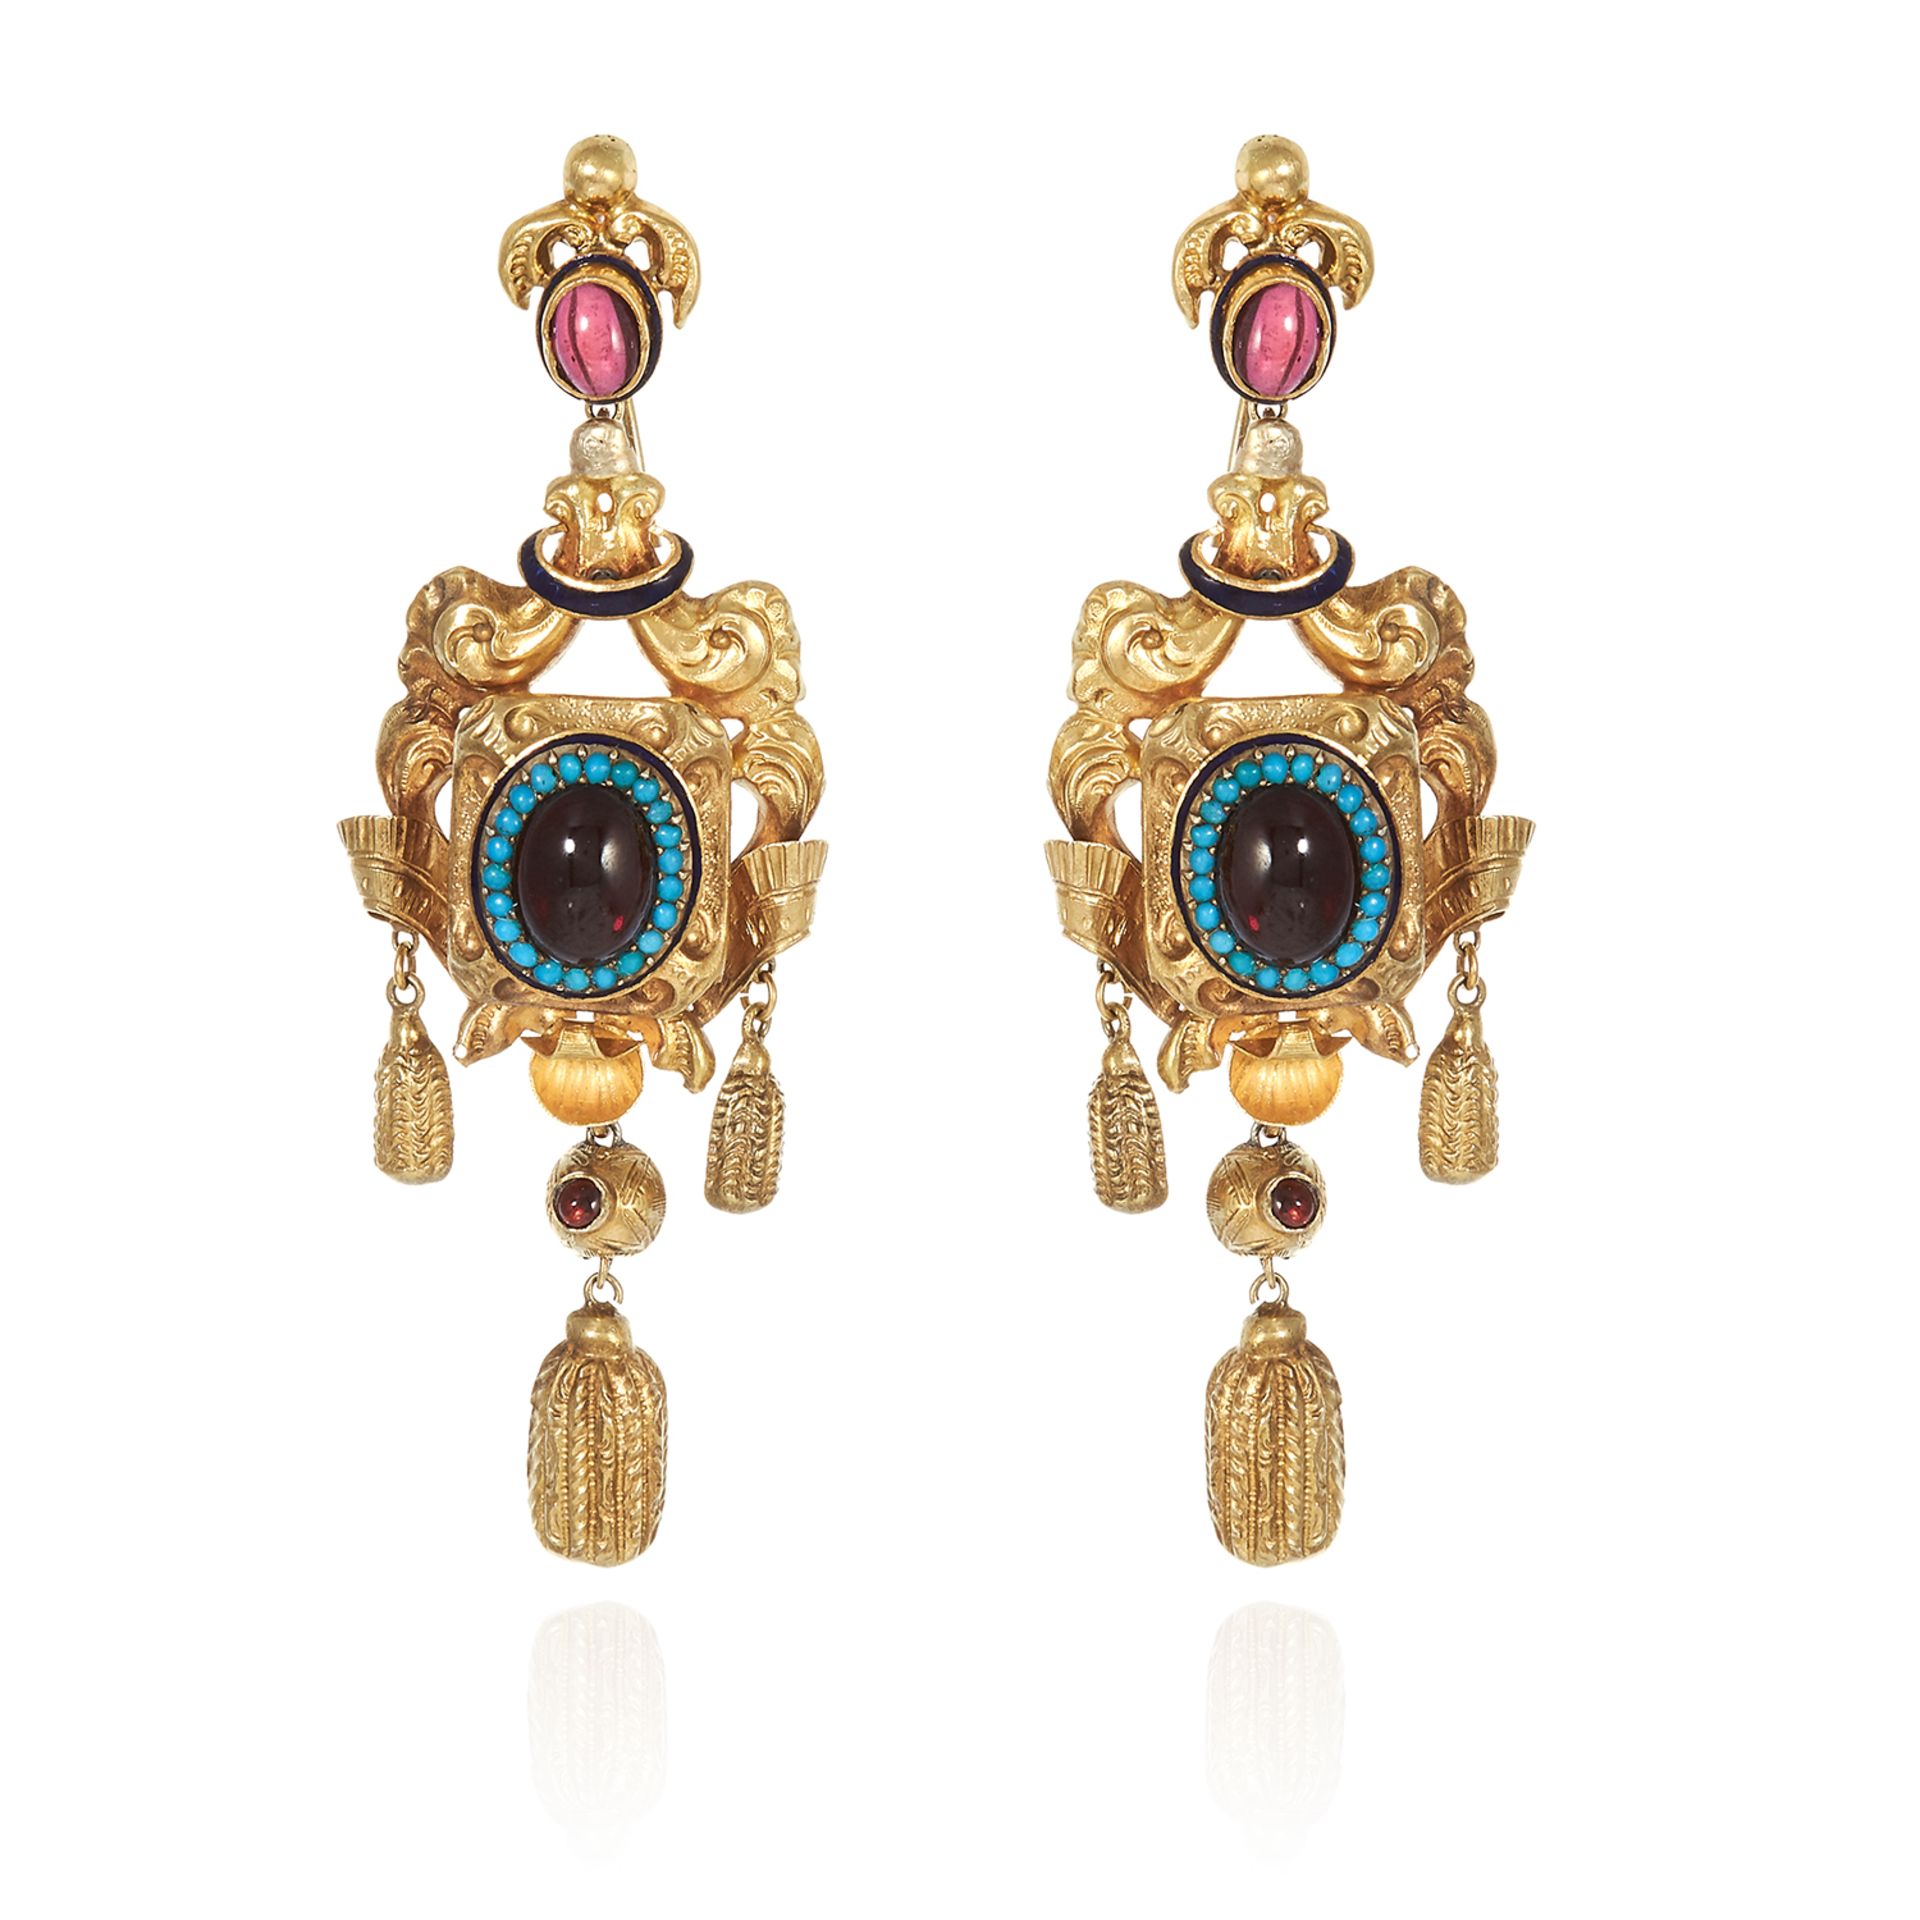 A PAIR OF GARNET, TURQUOISE AND ENAMEL EARRINGS, 19TH CENTURY each set with a garnet and turquoise